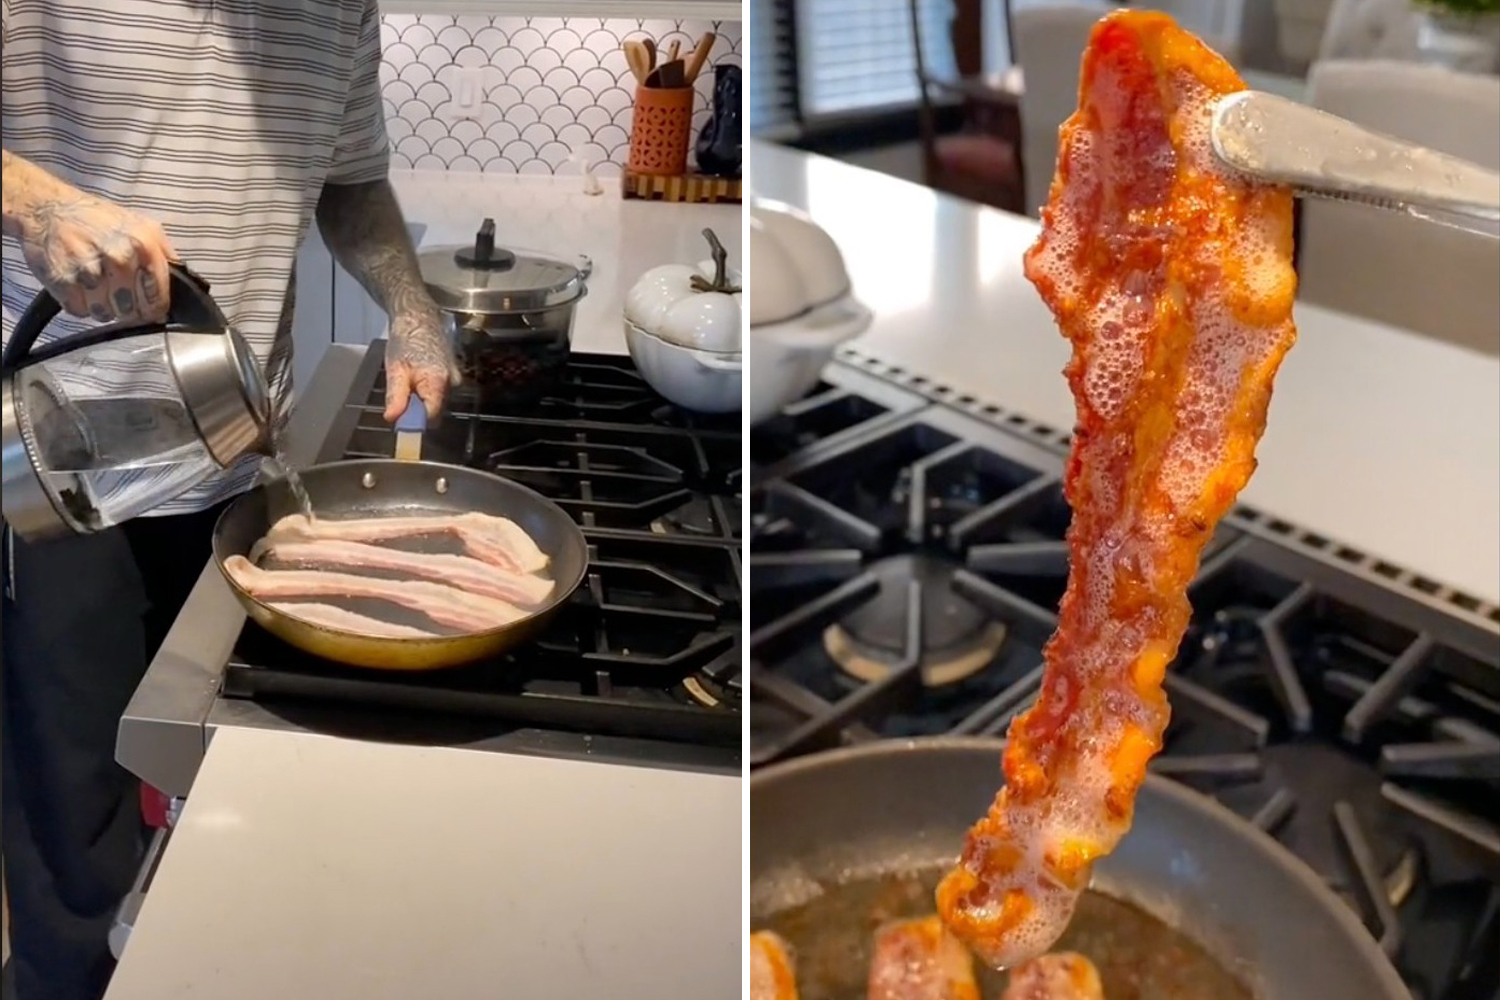 You’re cooking your bacon all wrong – my way prevents hot oil from splattering